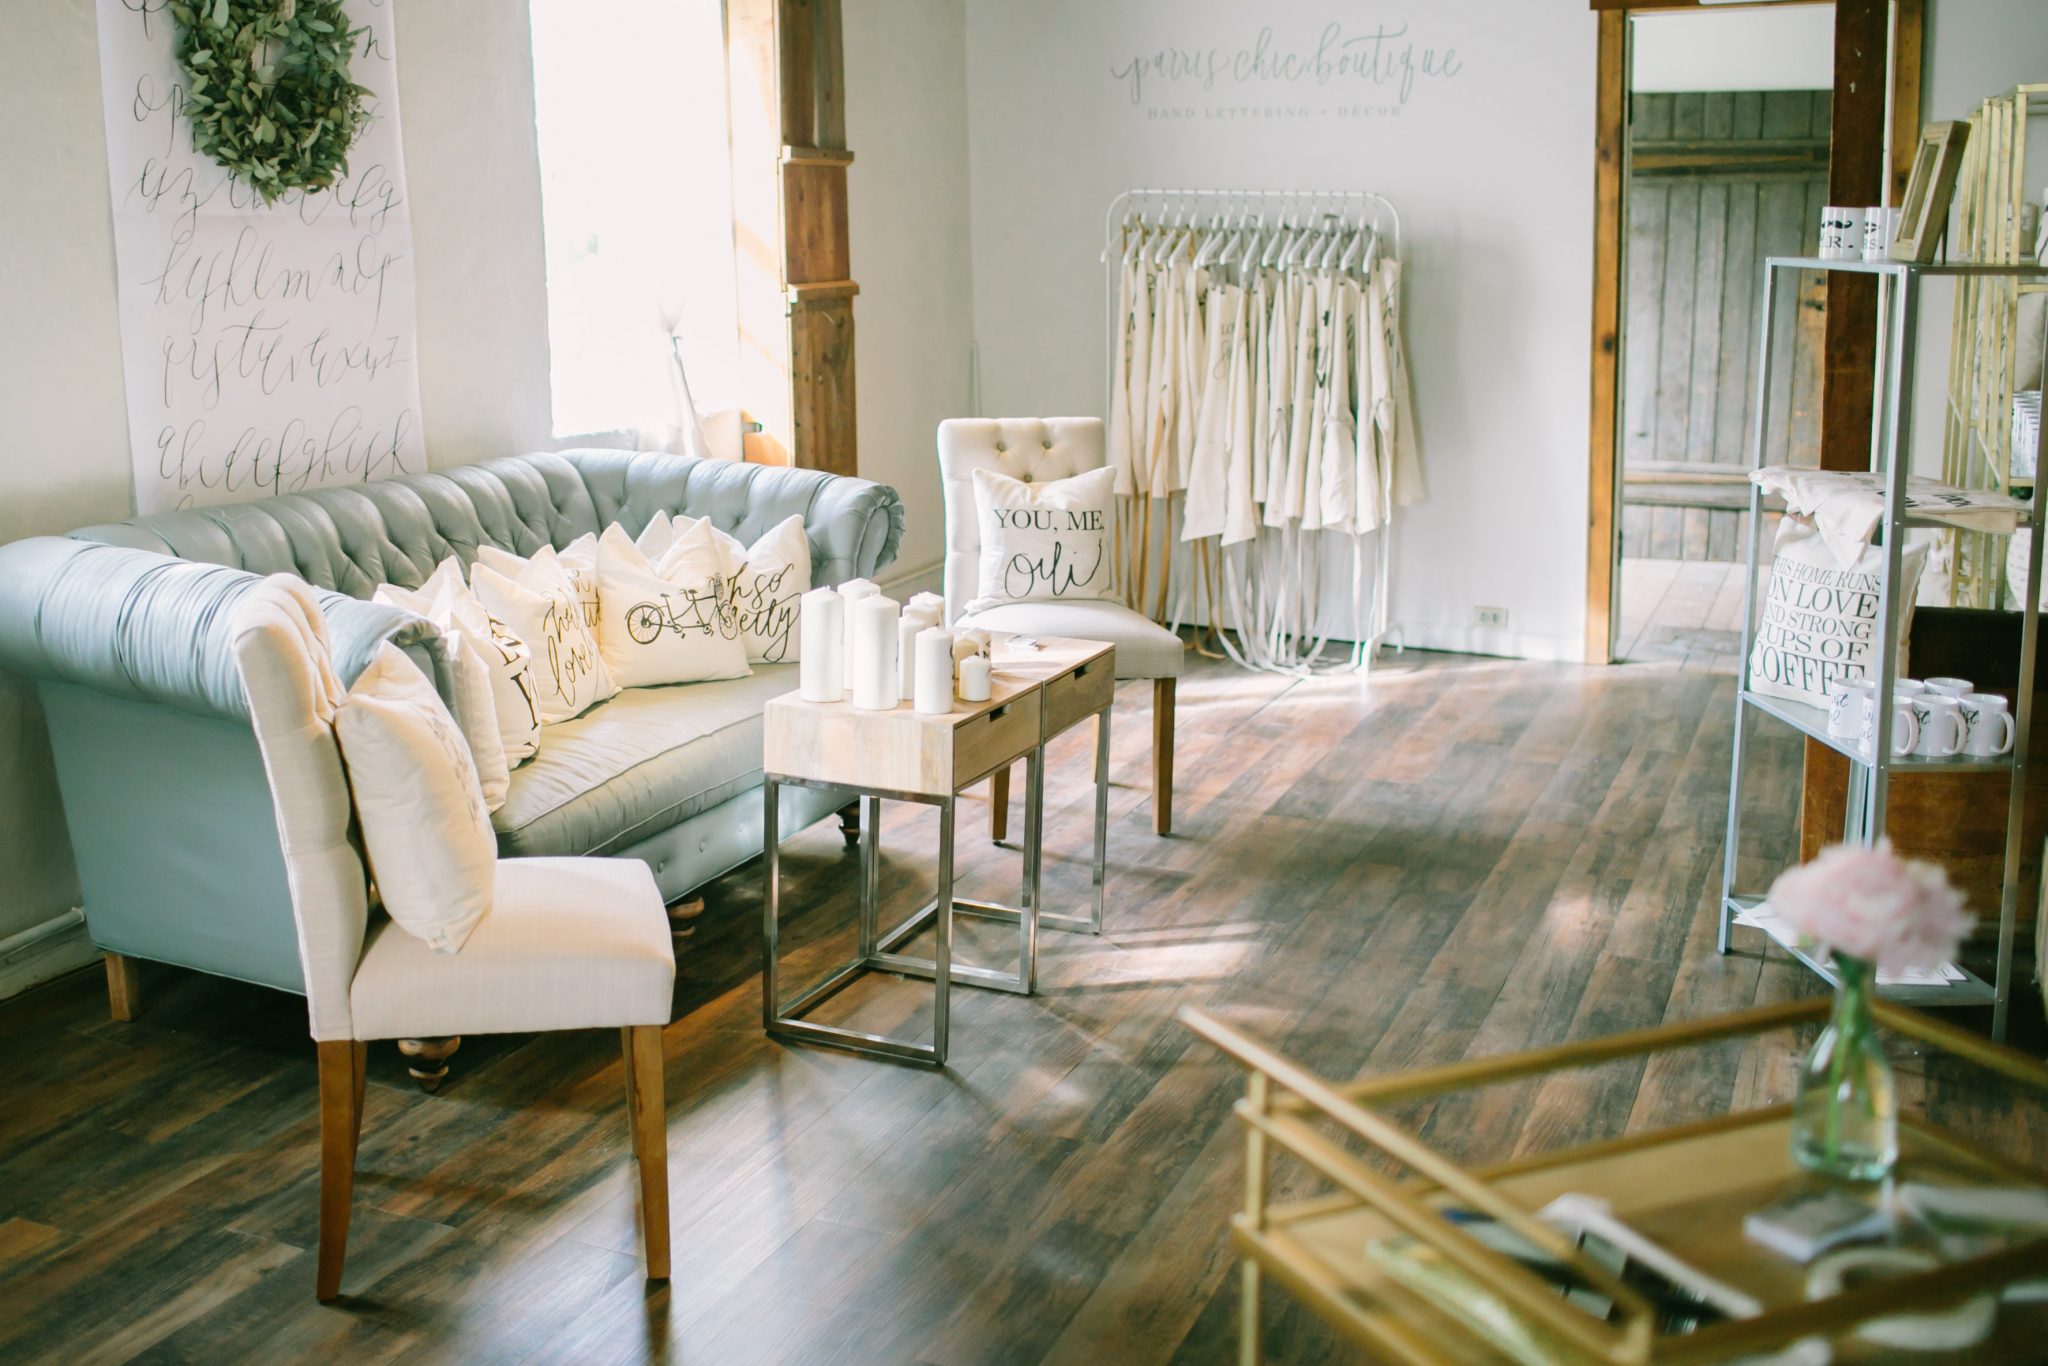 Photo of Parris Chic Boutique by Love and Light Photographs